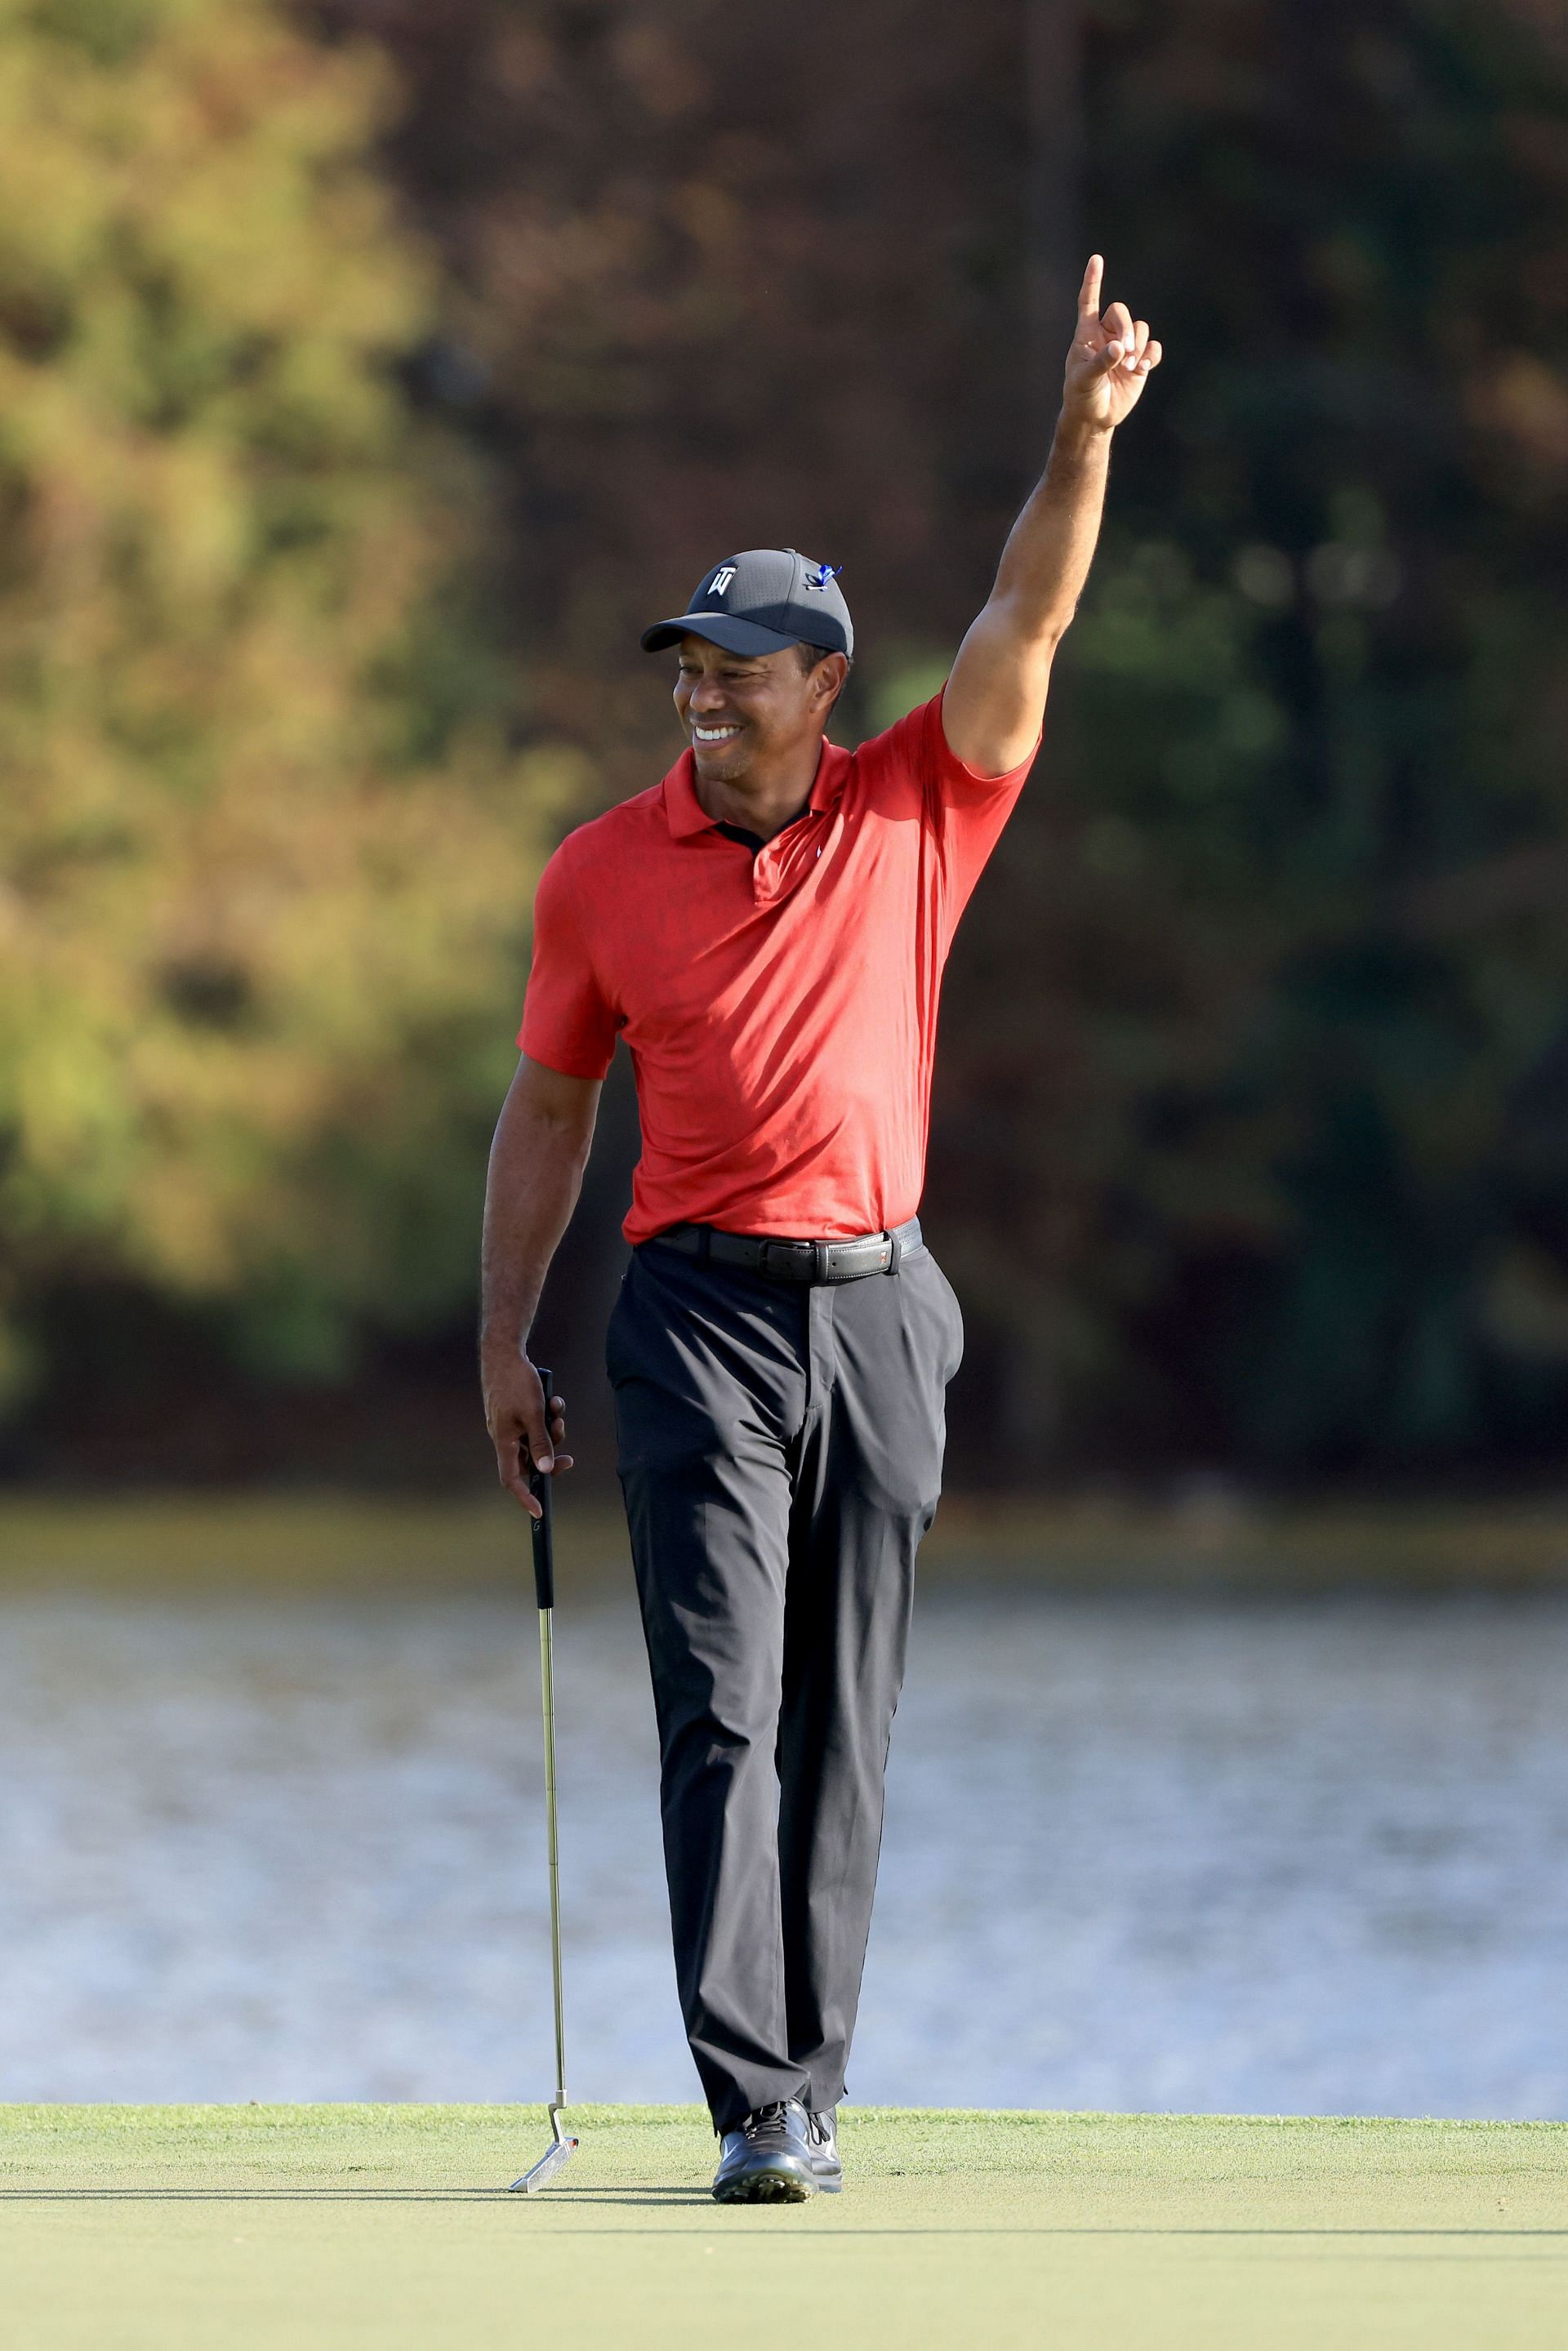 Tiger Woods was able to succeed despite multiple changes to his swing